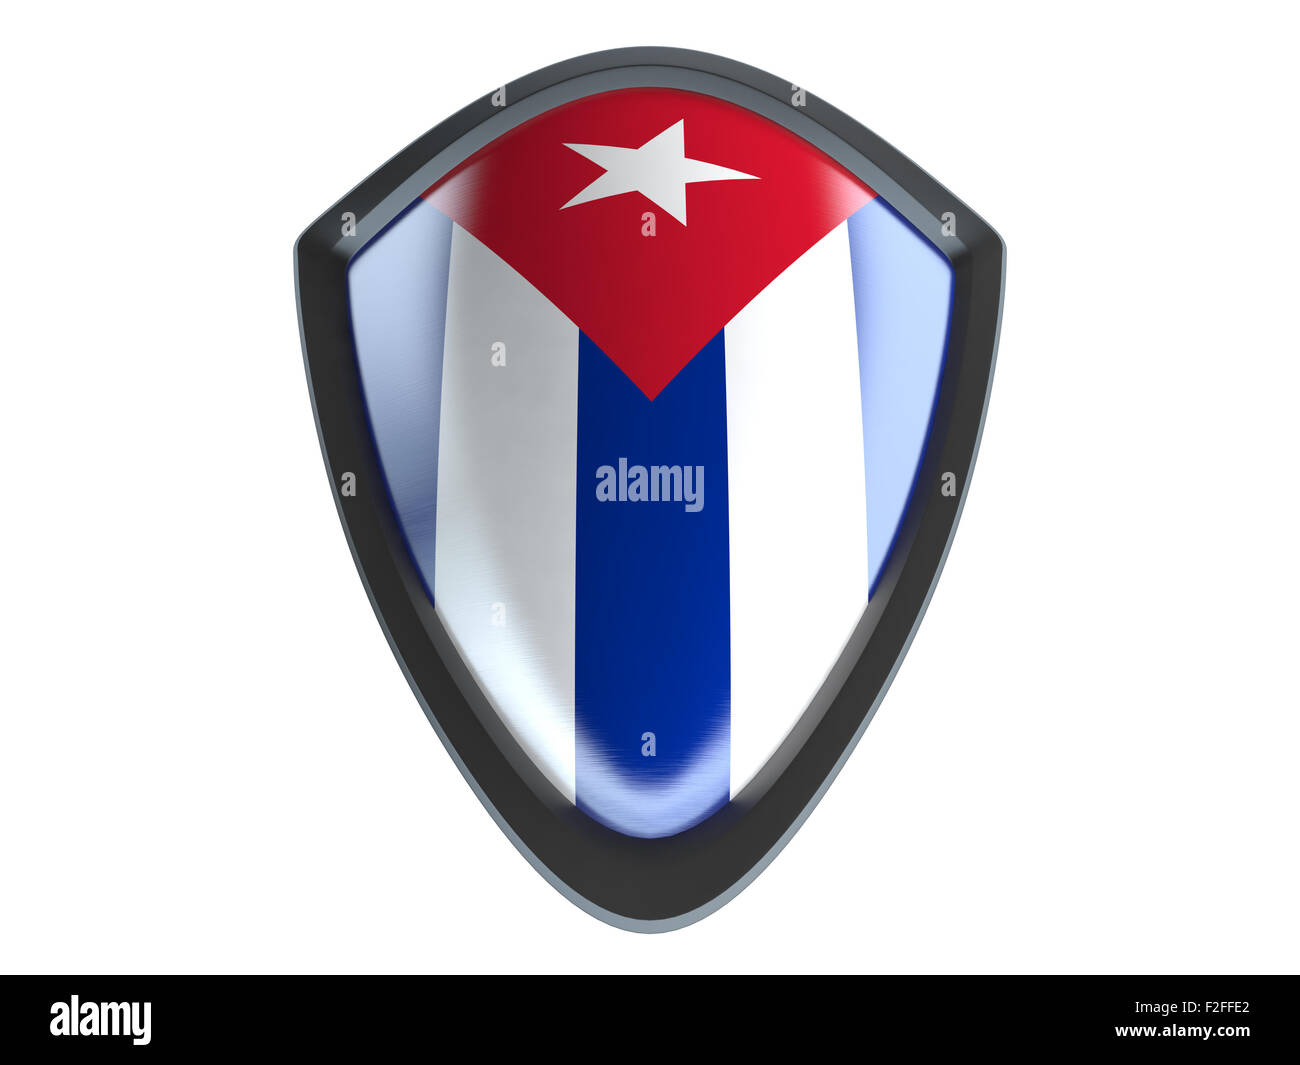 Cuba flag on metal shield isolate on white background. Stock Photo